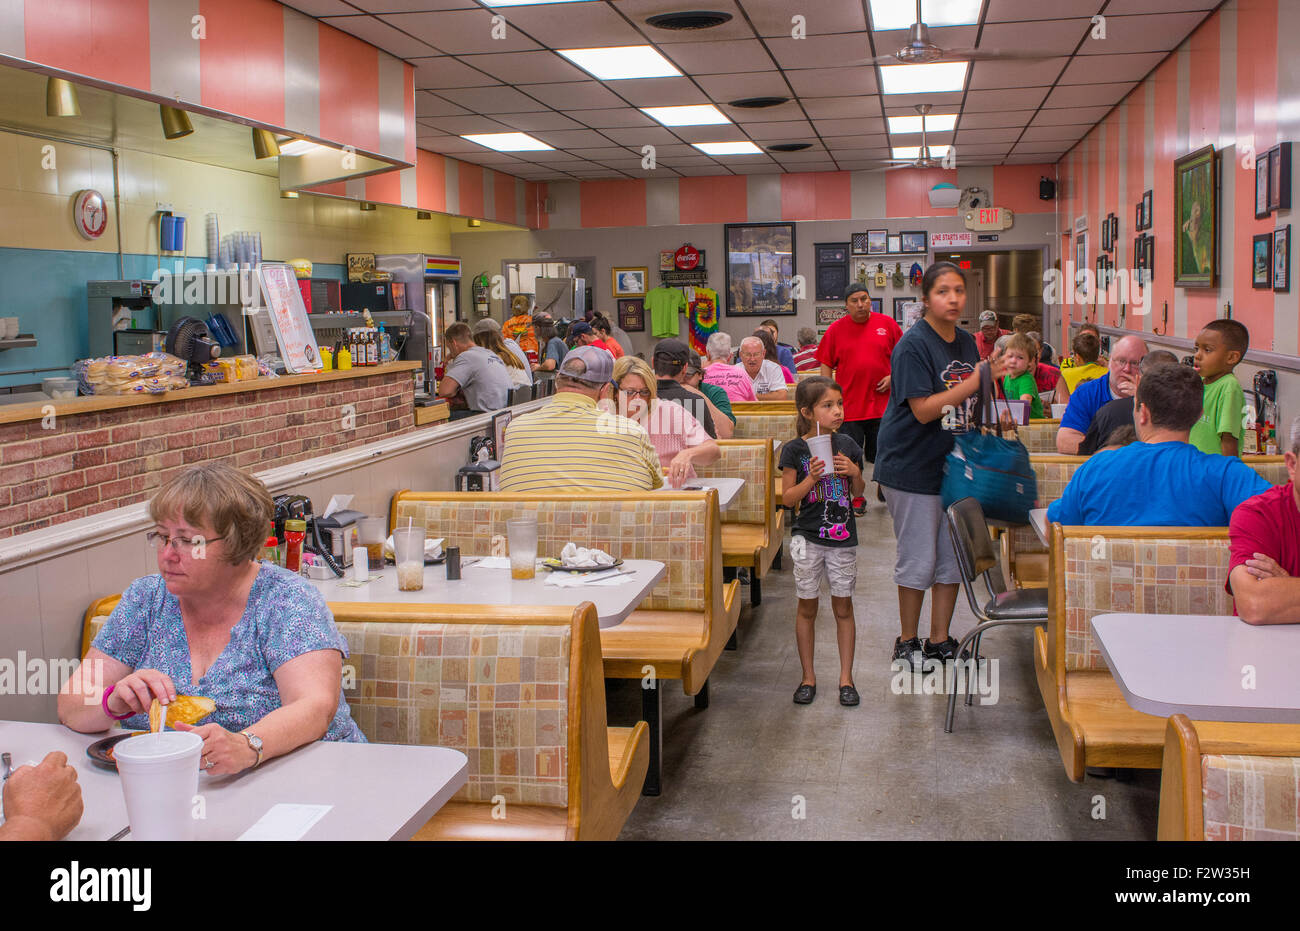 Shawnee Oklahoma OK famous old restaurant Hamburger King built in 1927 with phones at tables to order food Stock Photo